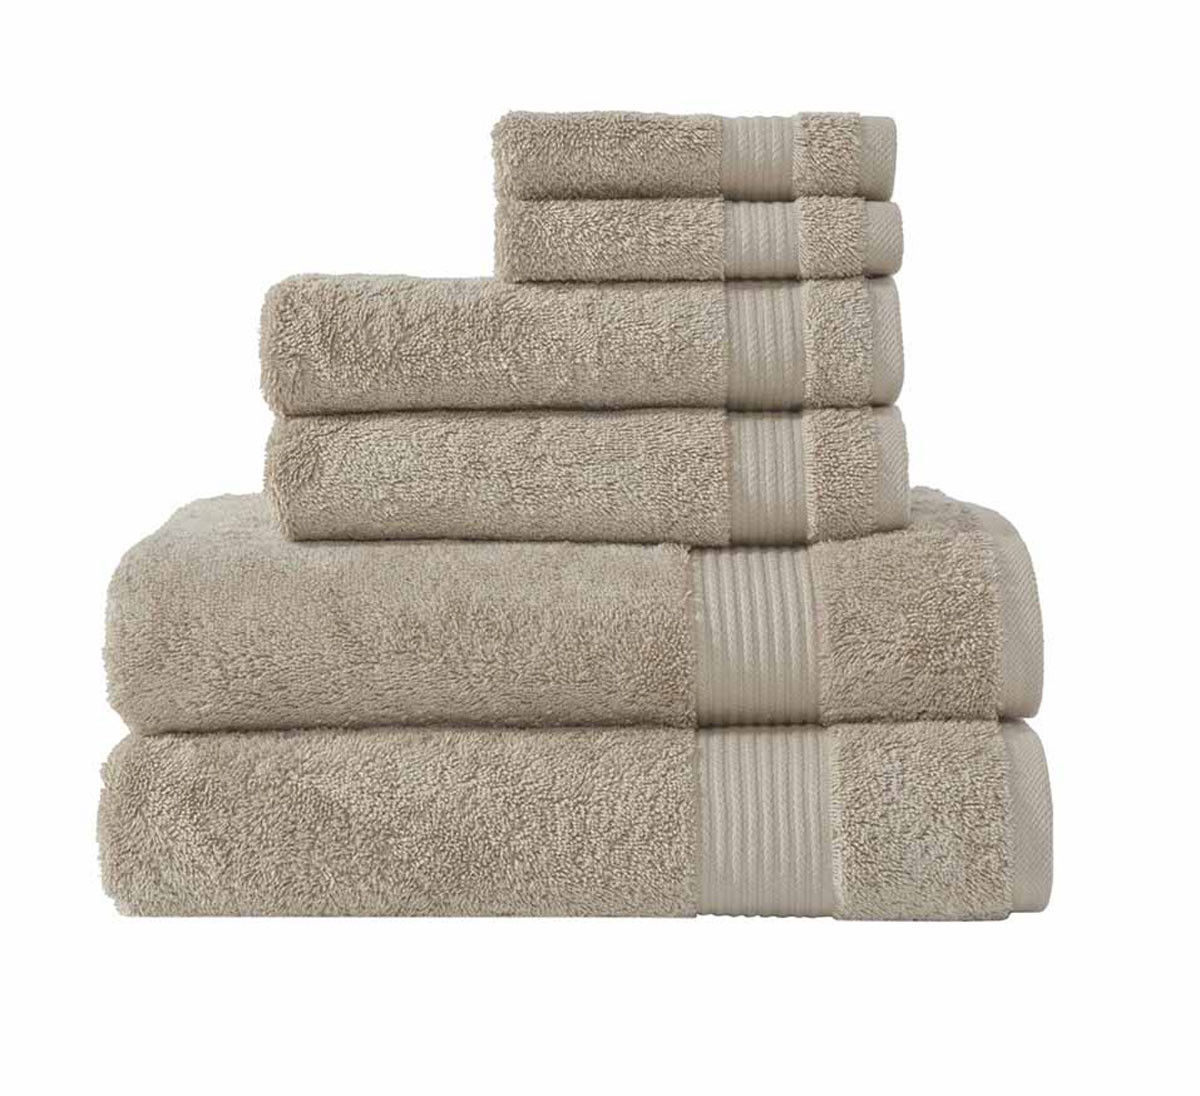 What brown towels are included in the Amadeus Turkish Brown Rice Towel Collection?